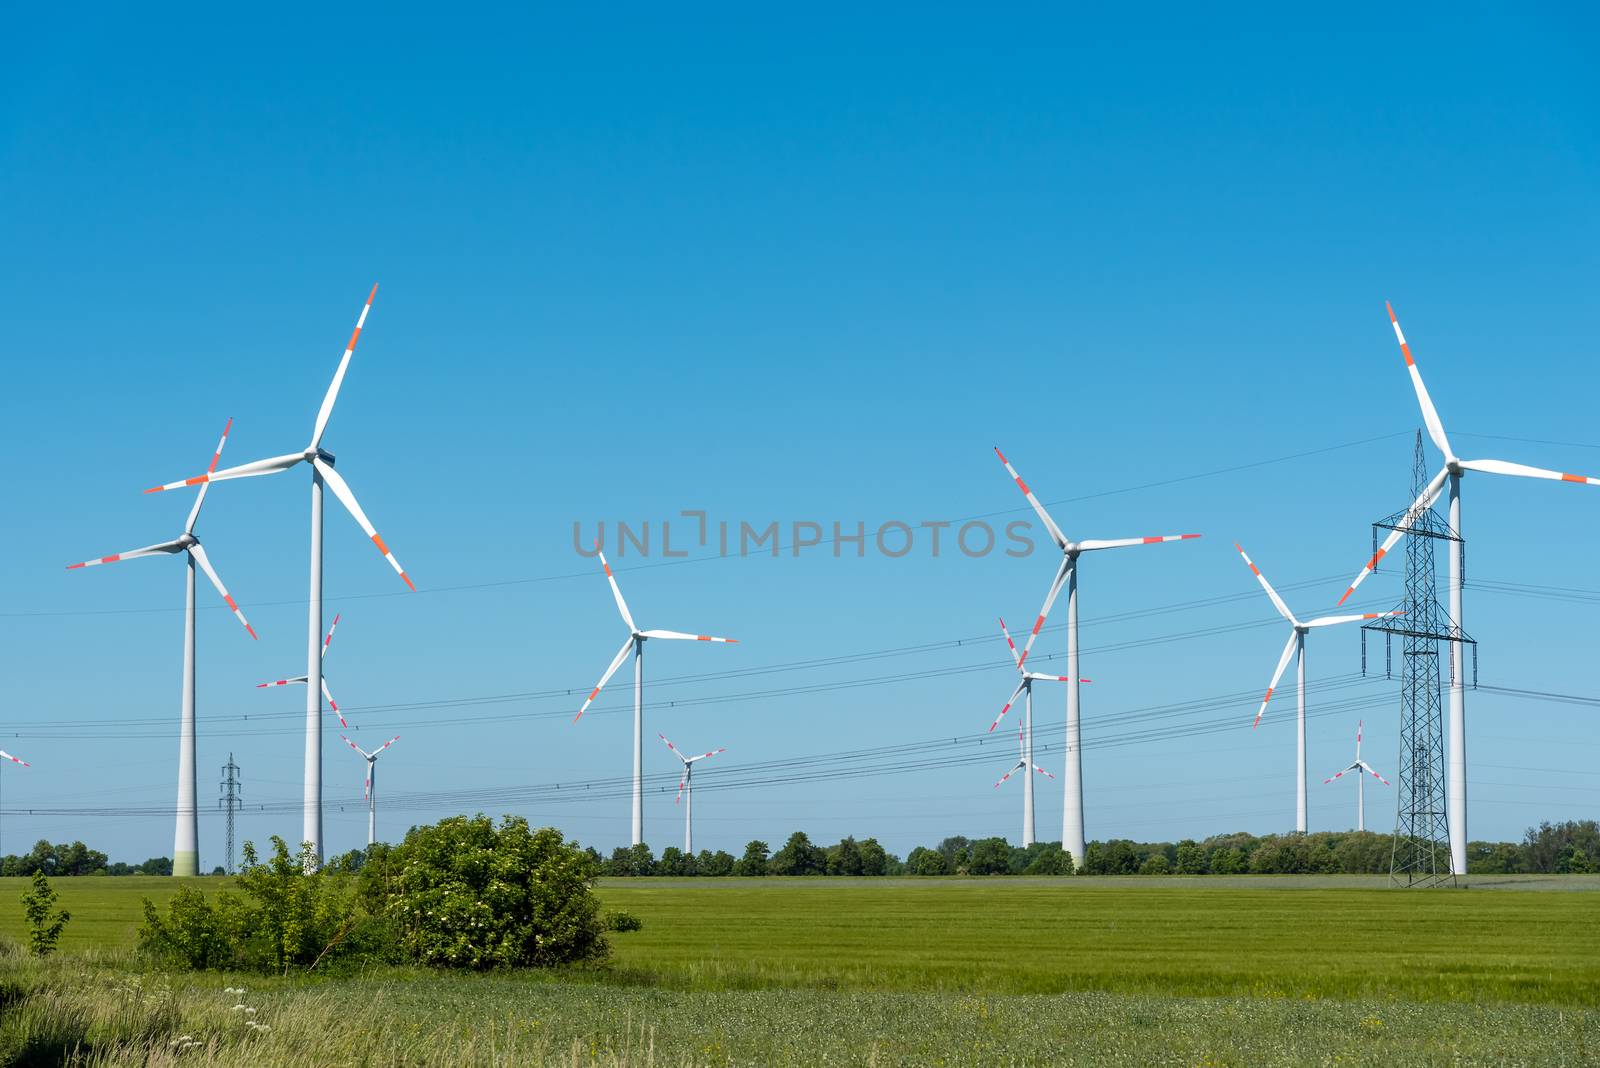 Power lines and wind engines seen in Germany